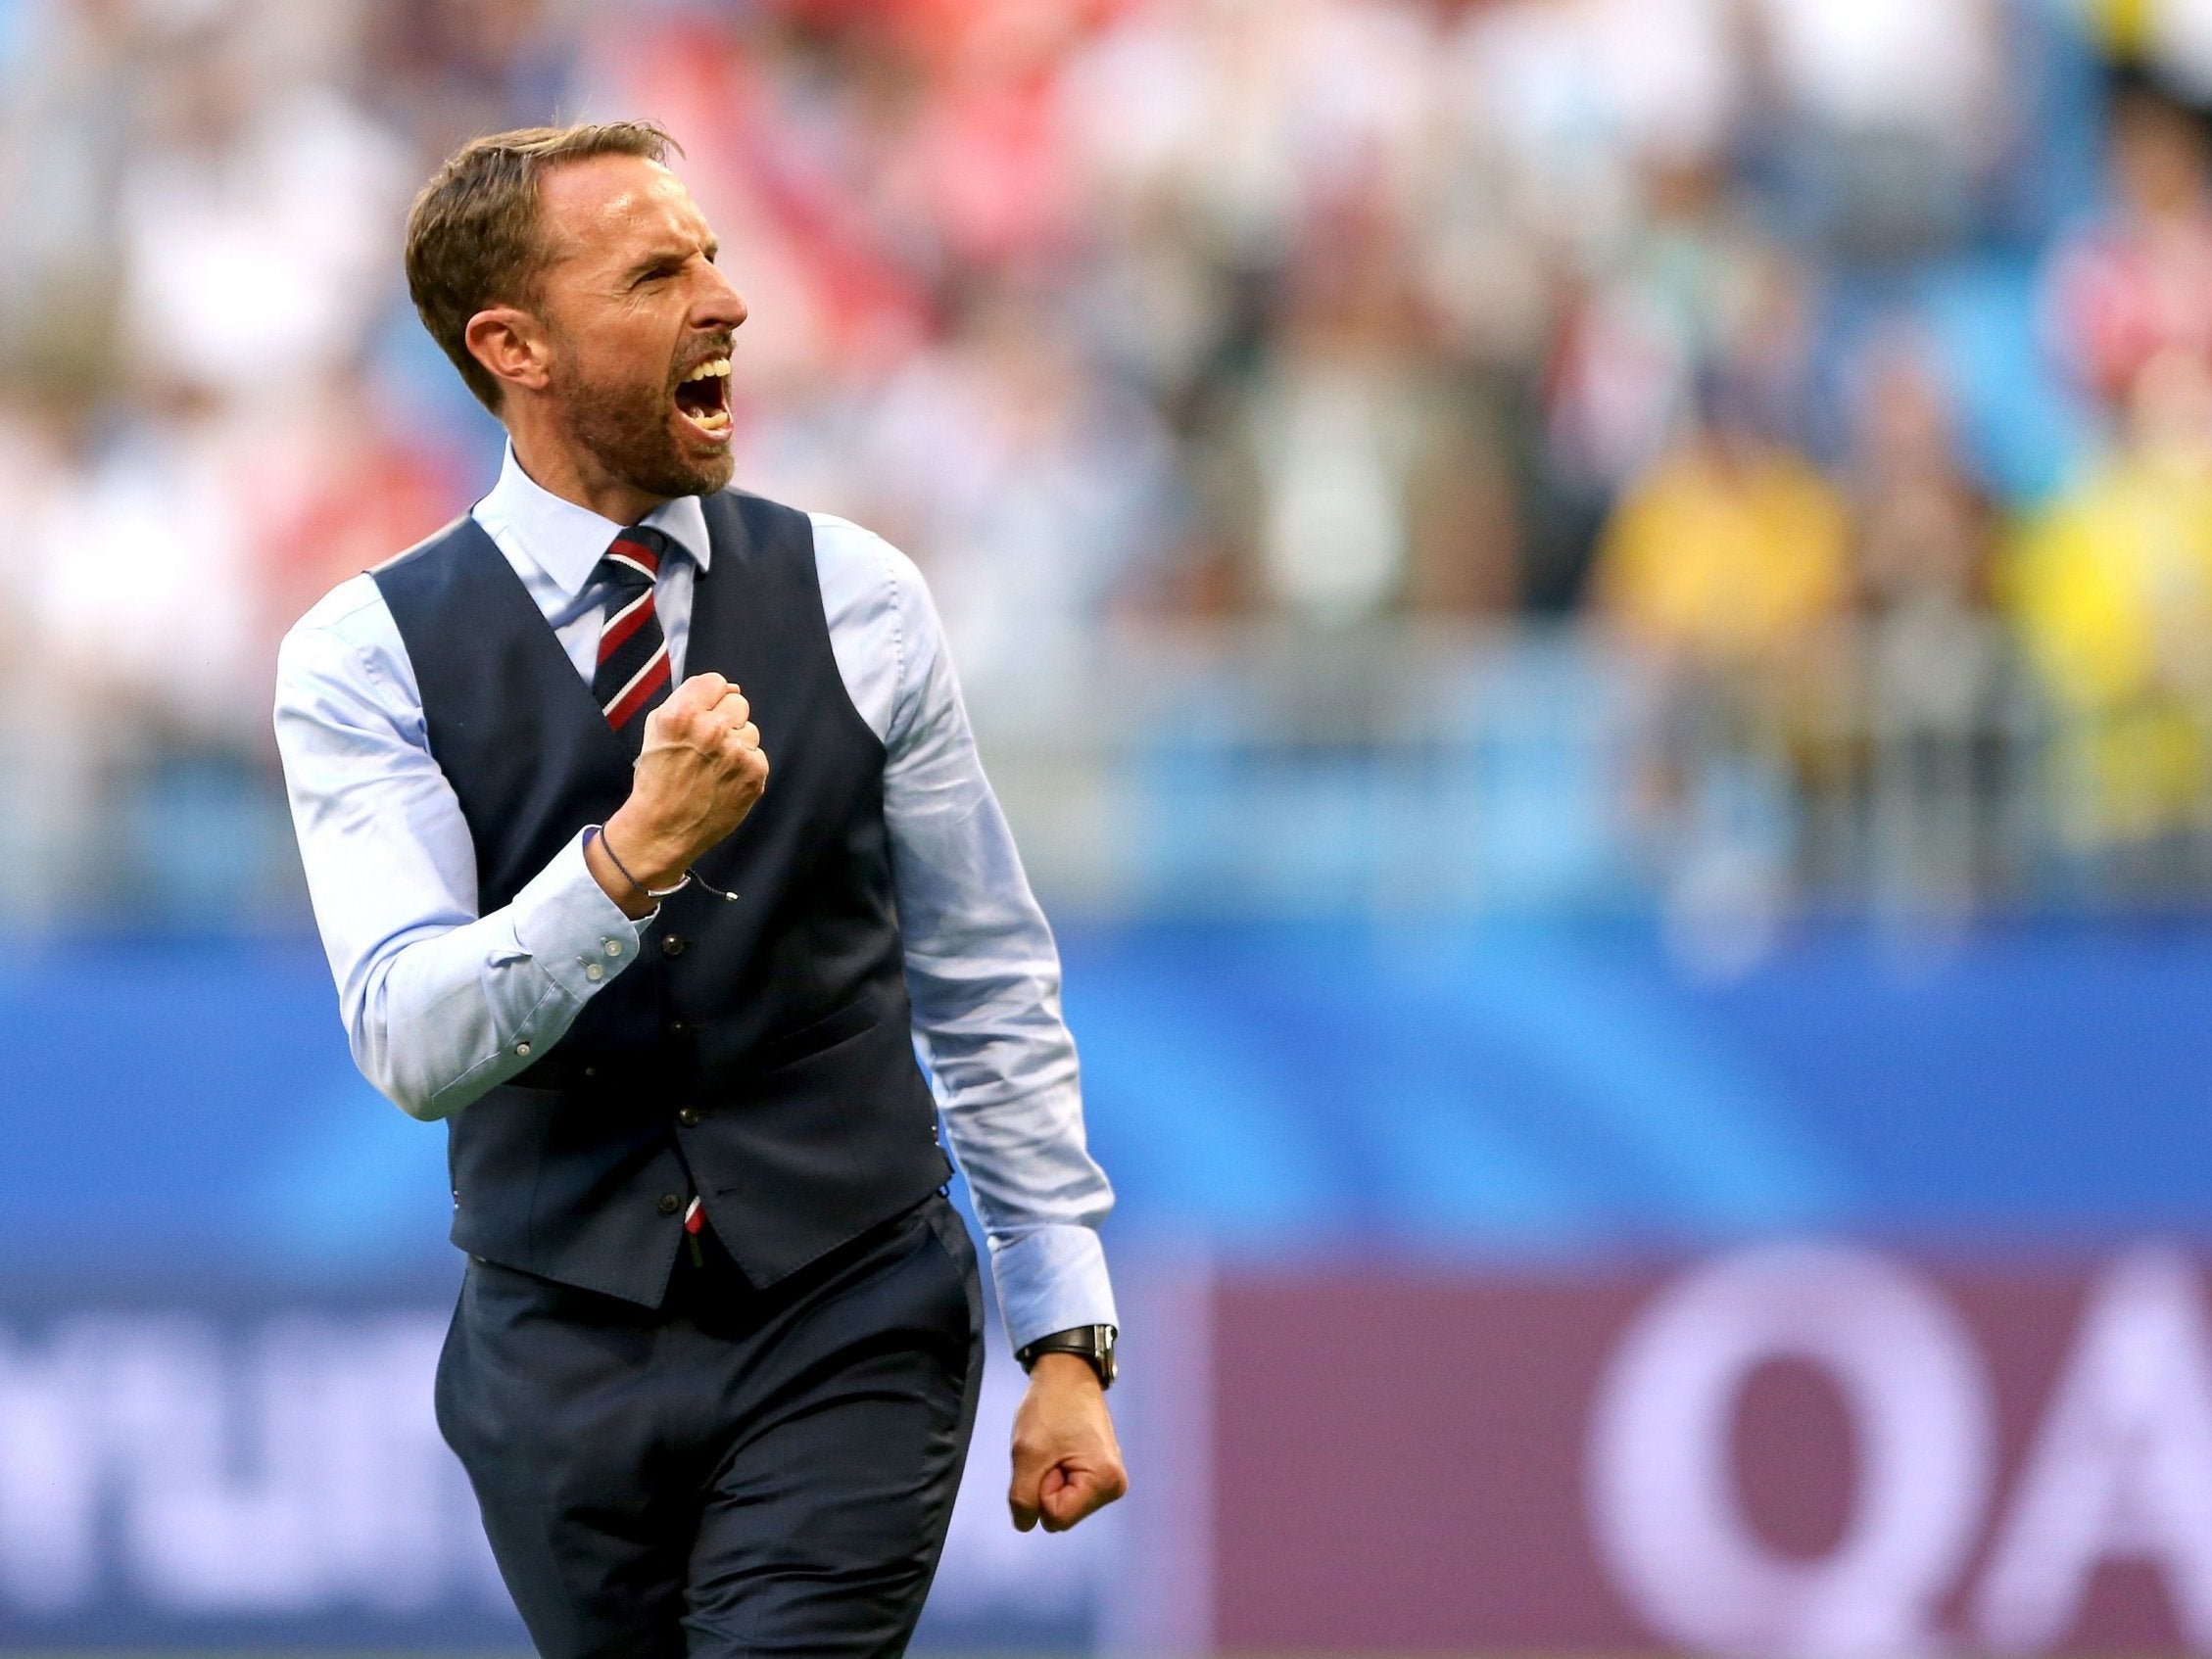 Gareth Southgate has led England to the World Cup semi-finals